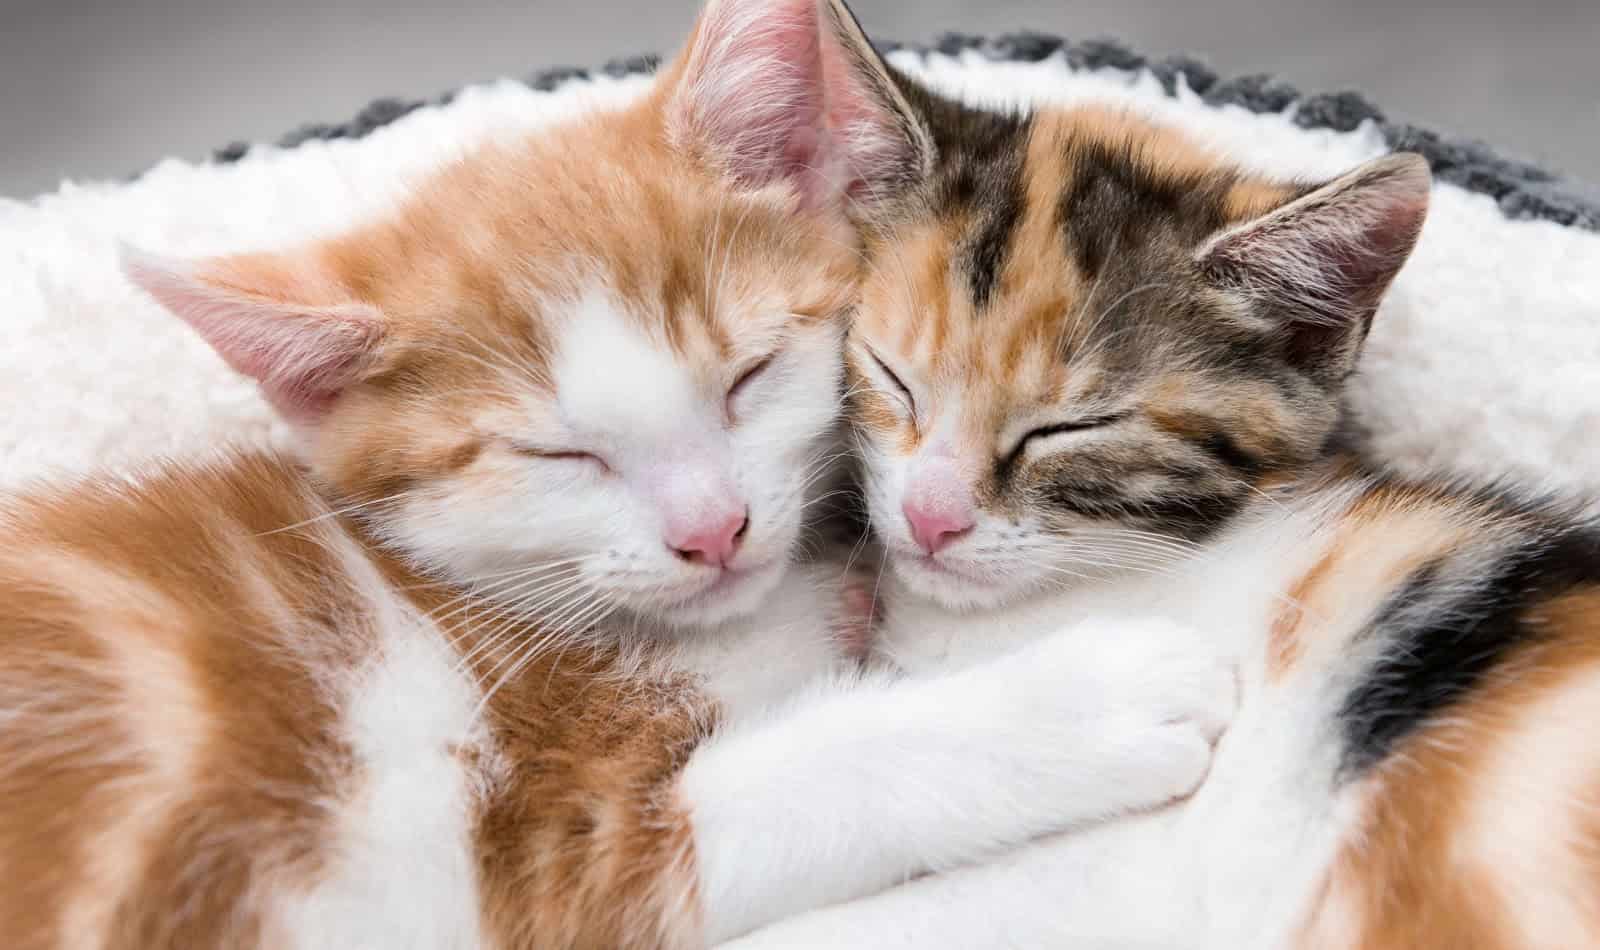 Wondering, "Should I get another cat to keep my cat company?" Curious if gender matters when adding a second kitty? Check out these answers and more!